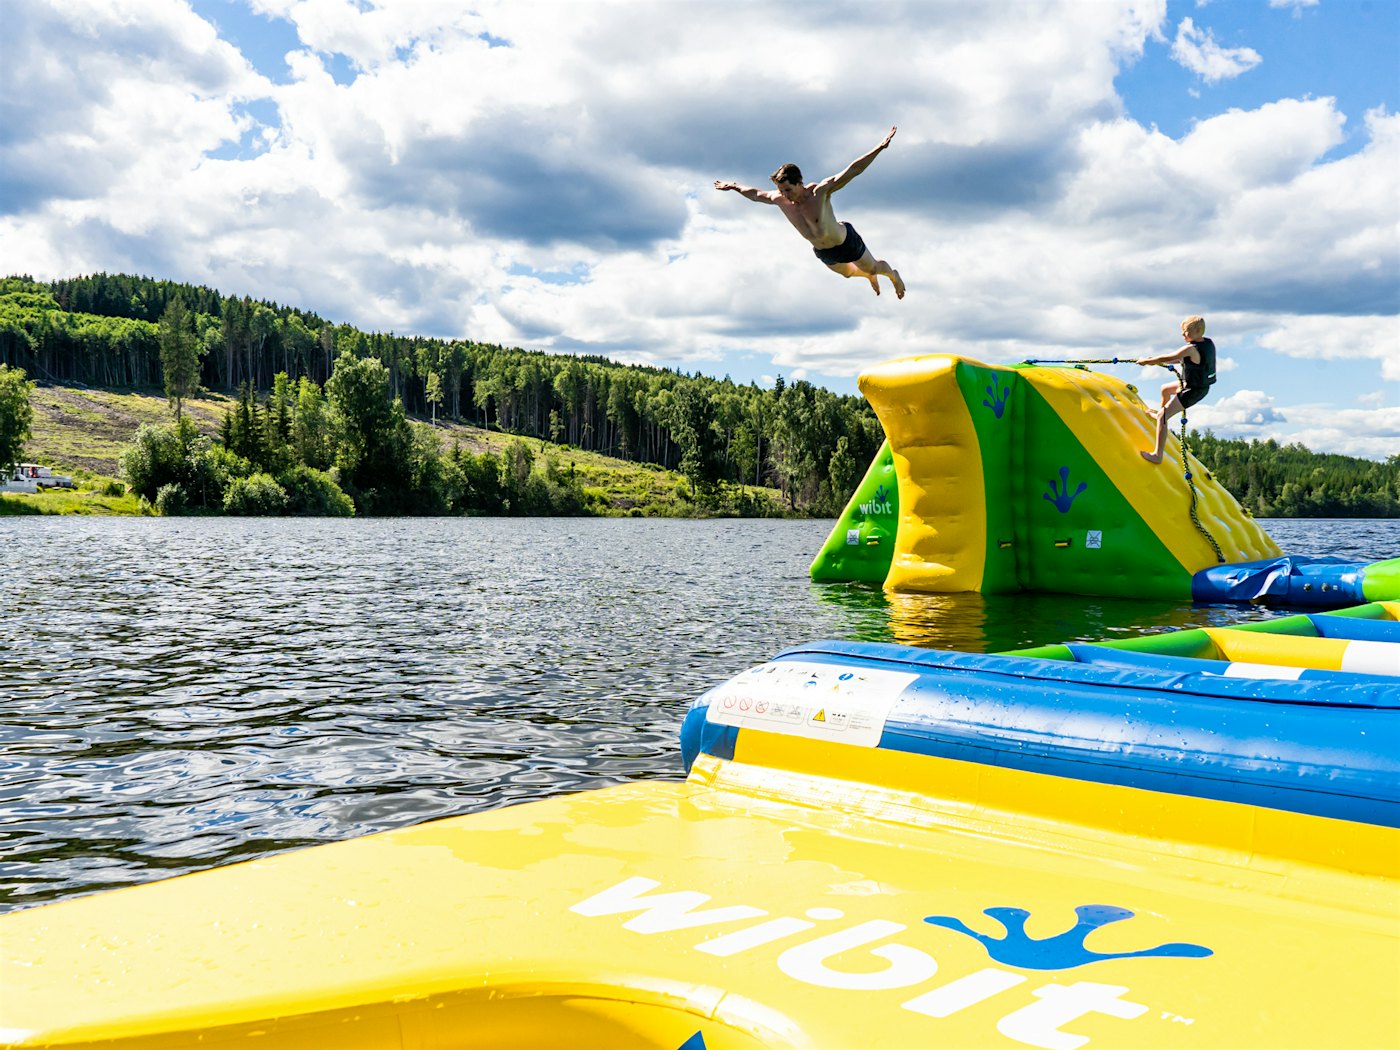 Children play and enjoy themselves at the floating water park in Mjøsa, a young person plunges from a tower. Photo